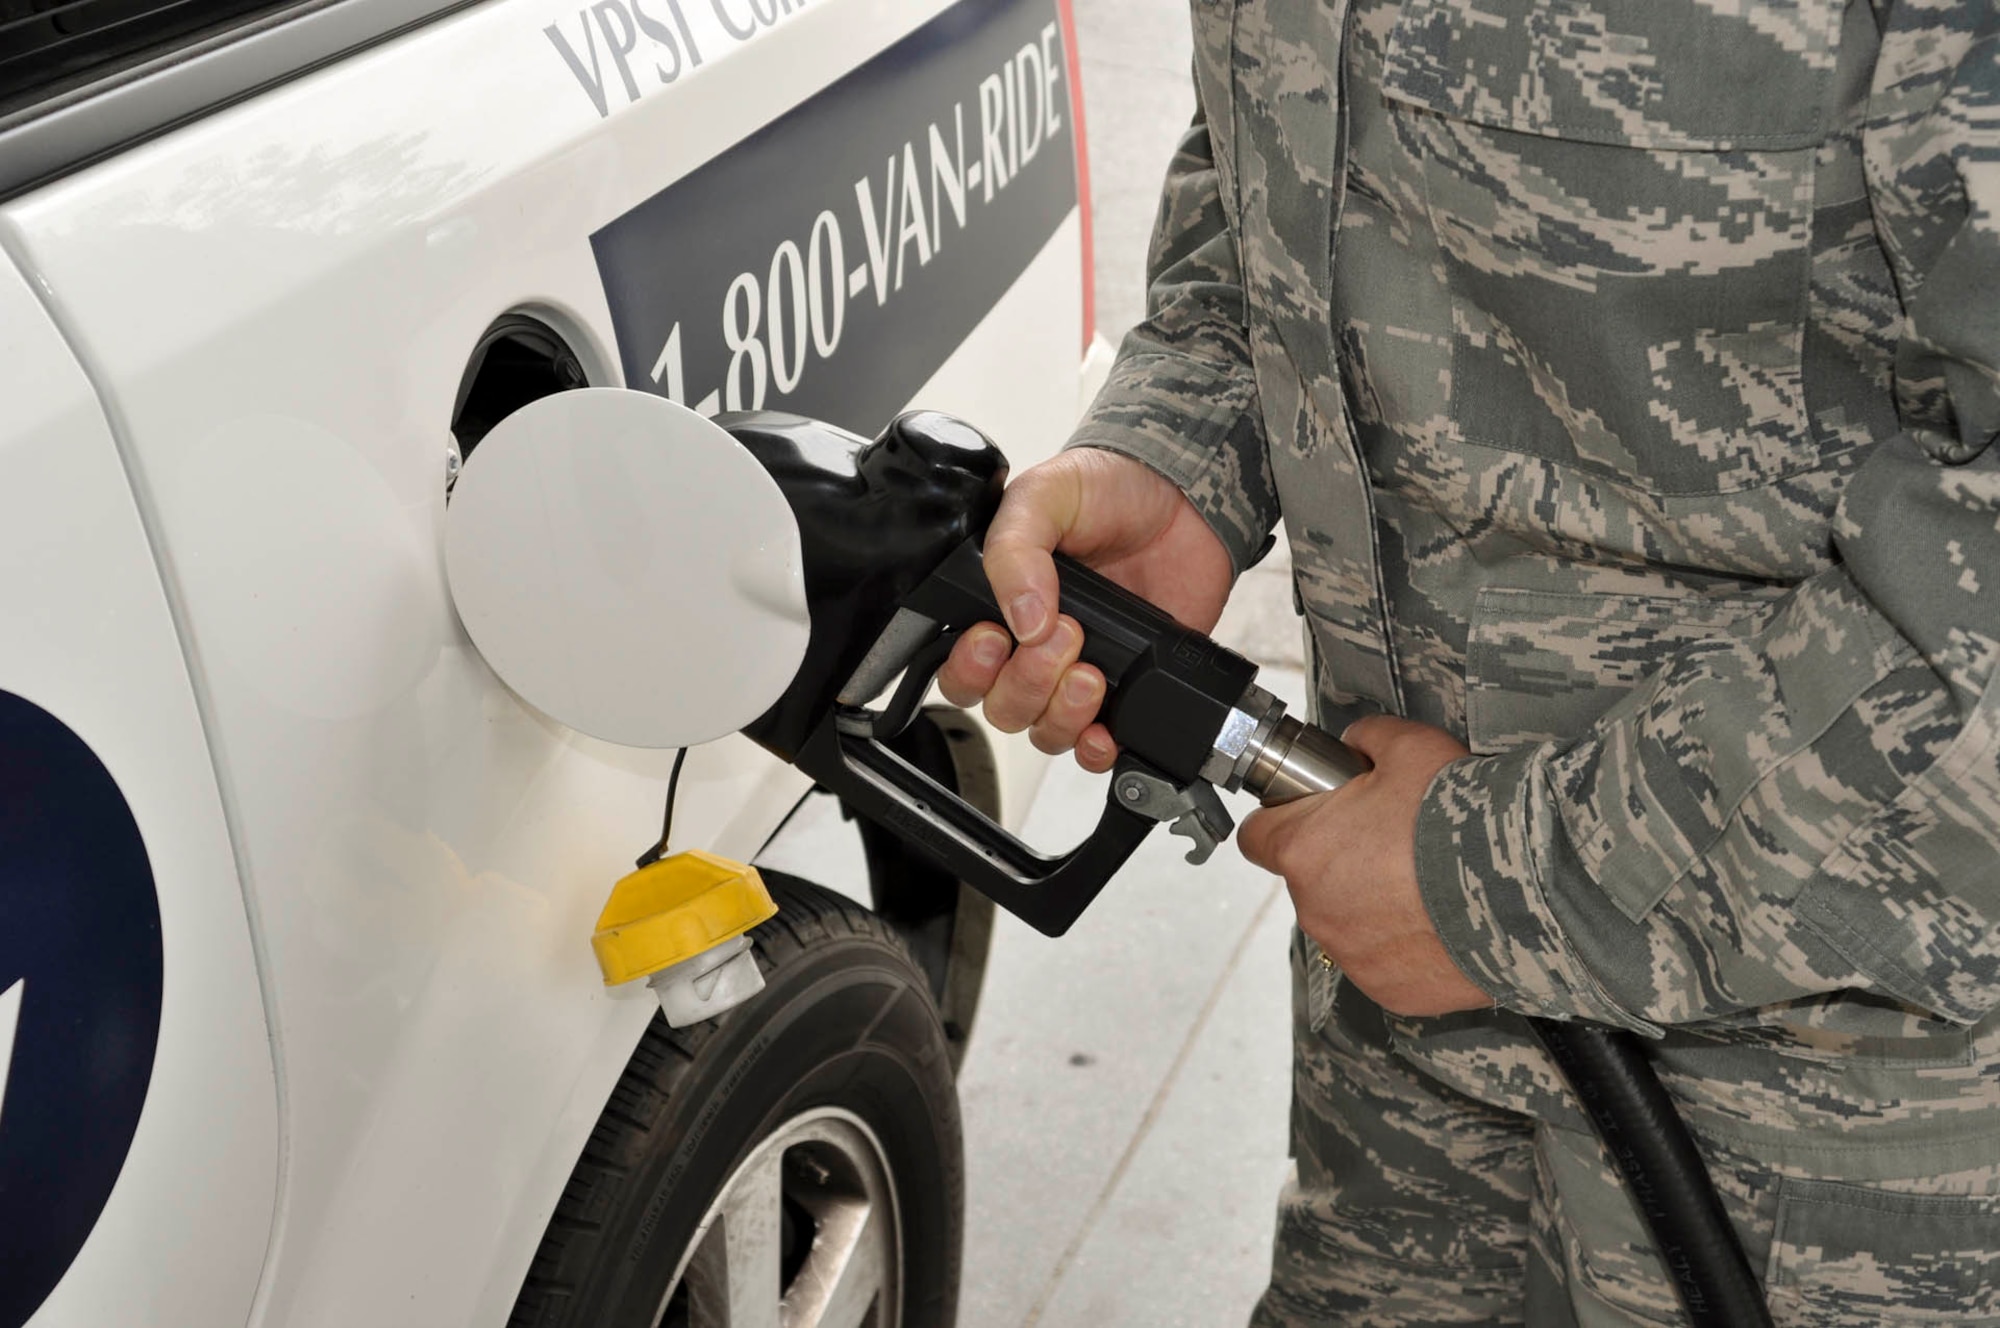 An Airman pumps gas into a rideshare van at a gas station across the street from March Air Reserve Base, Calif., April 18, 2011.  Defense Department service members and civilian employees who use an alternate form of transportation are eligible for monthly vouchers, which, in almost all cases, cover the cost of vanpooling, including gas.  (U.S. Air Force photo/ Megan Just)